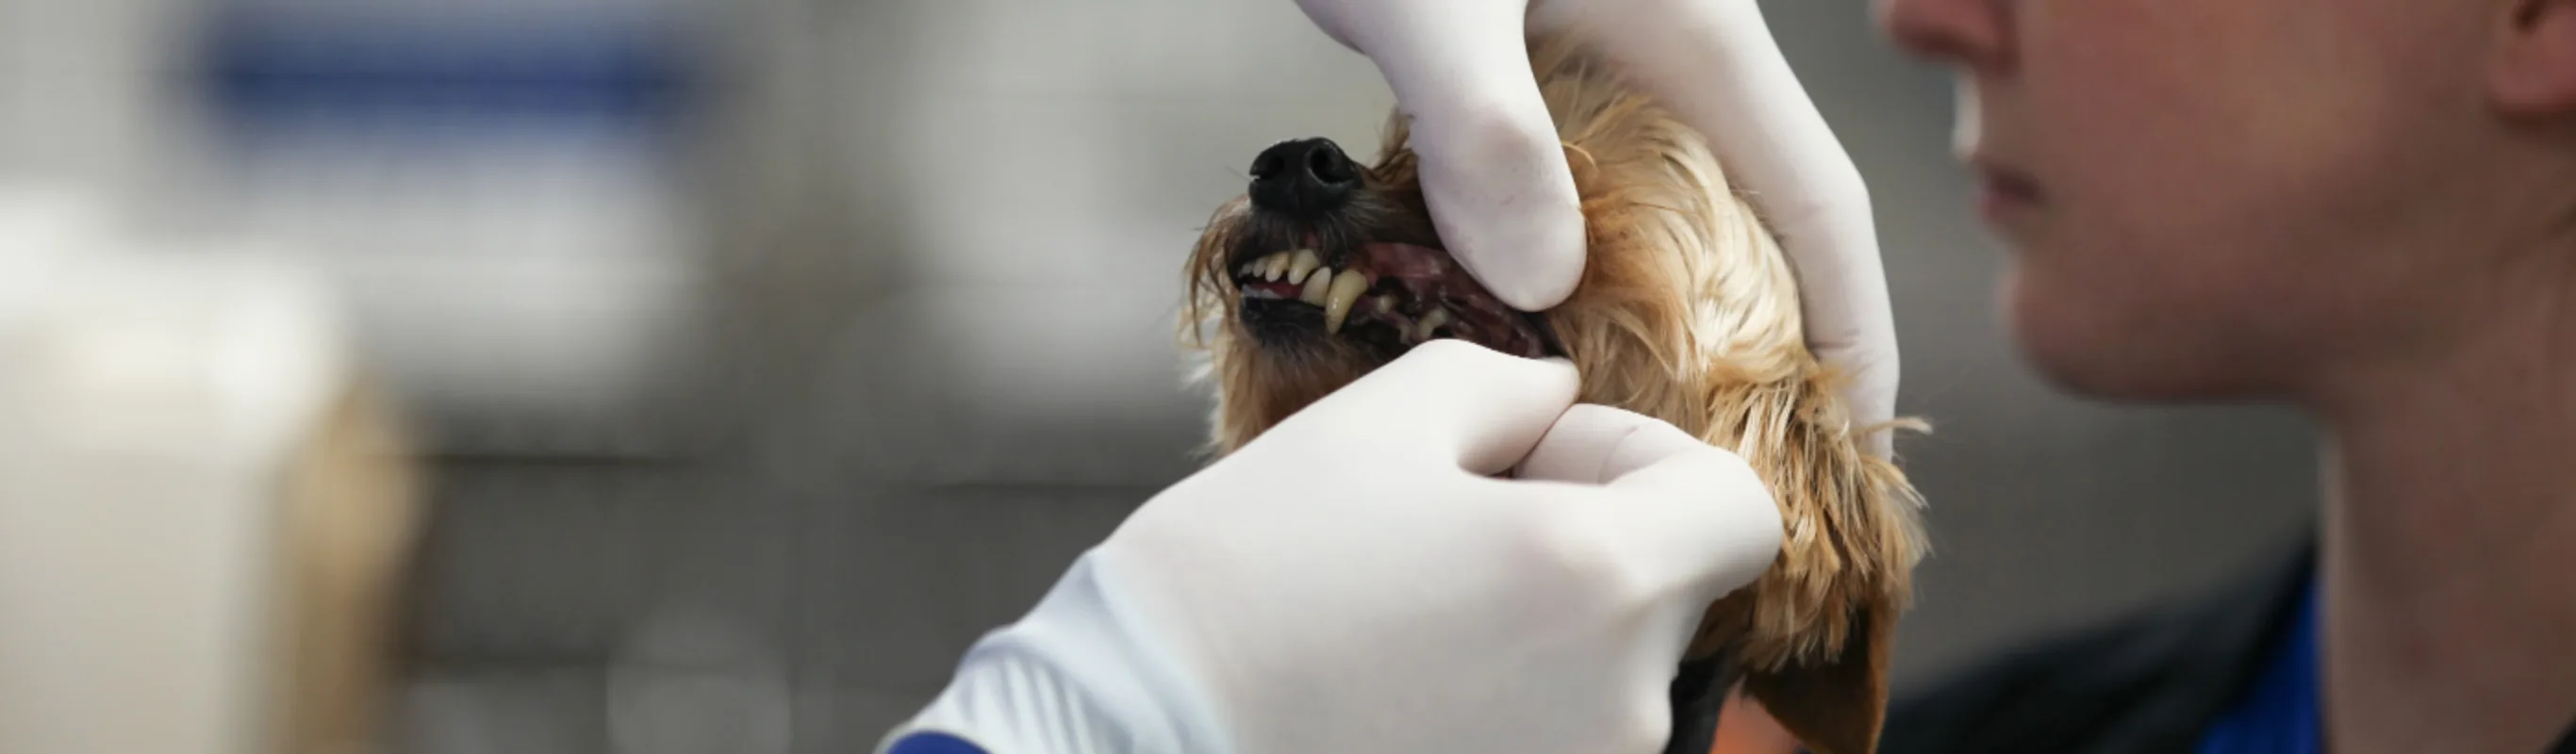 Veterinarians cleaning a puppy's teeth